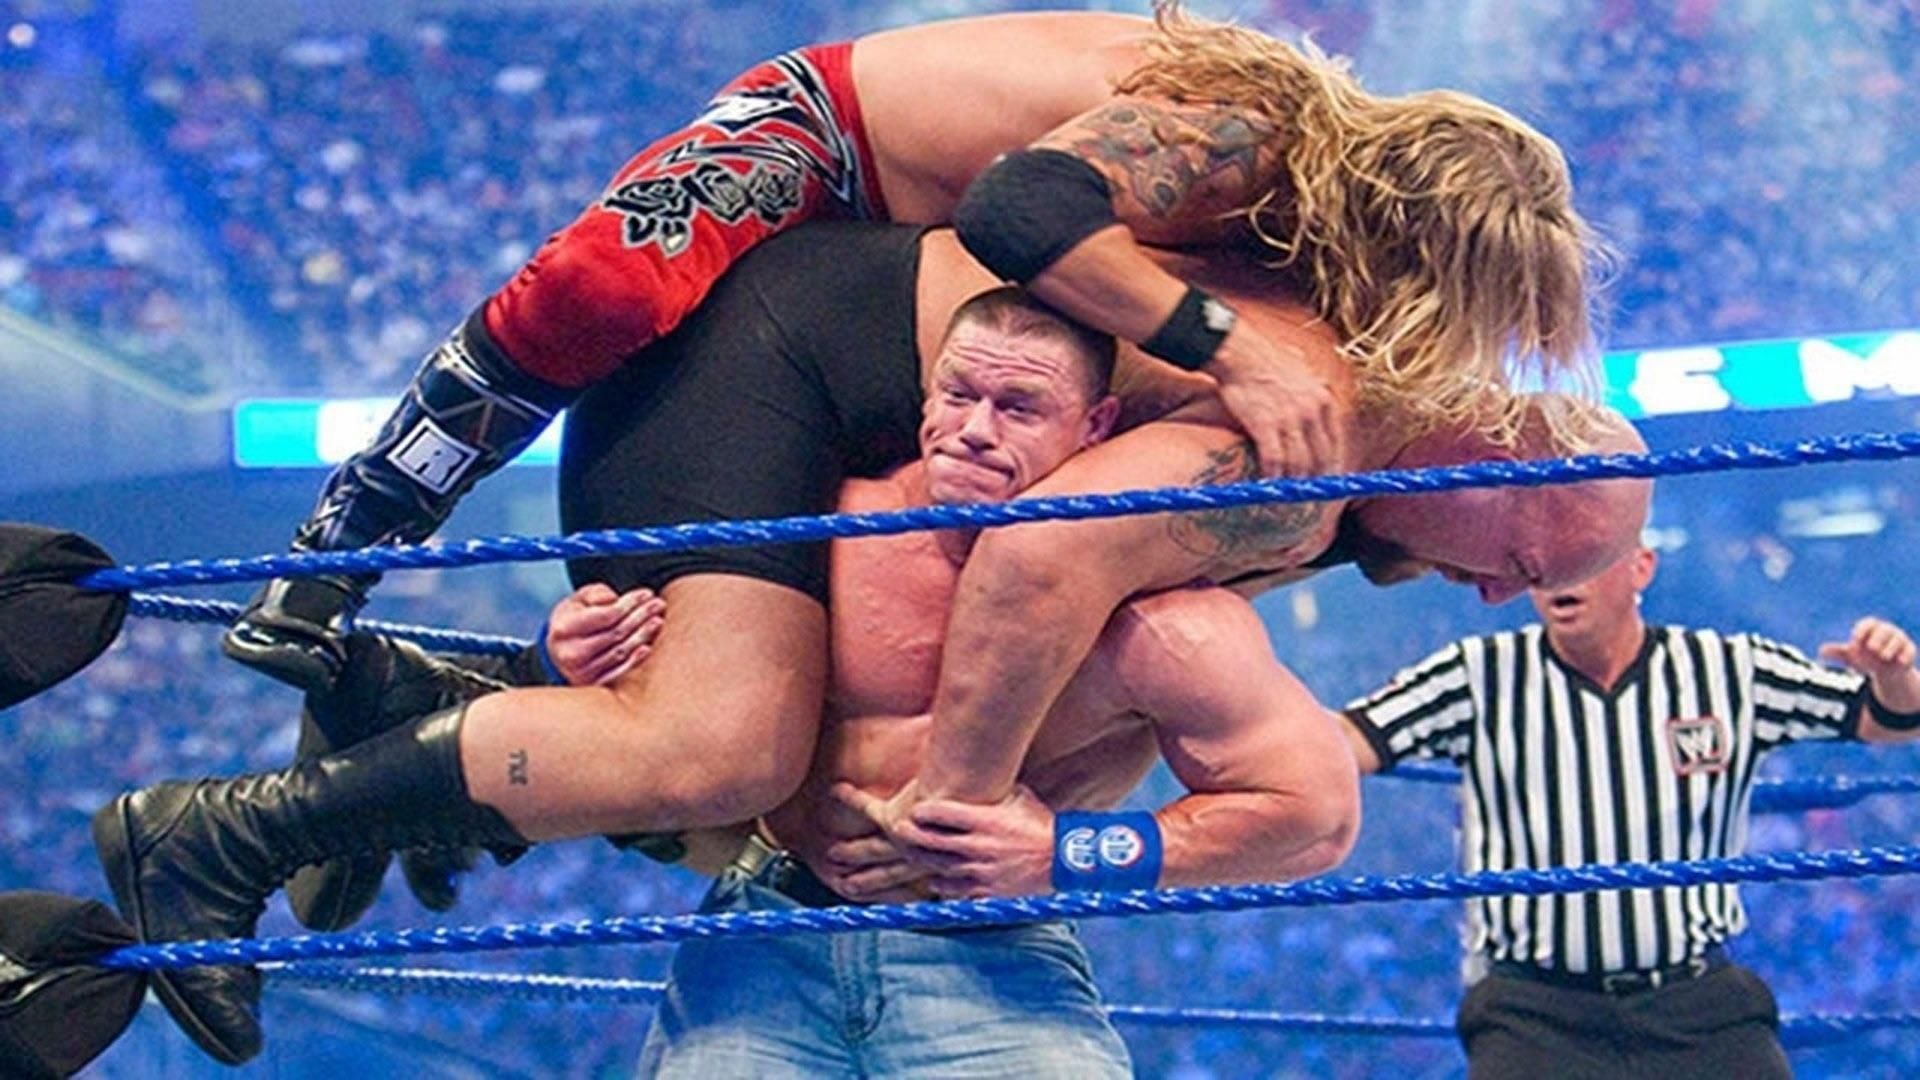 John Cena lifts Edge and Big Show on his shoulders during their WrestleMania 25 bout.